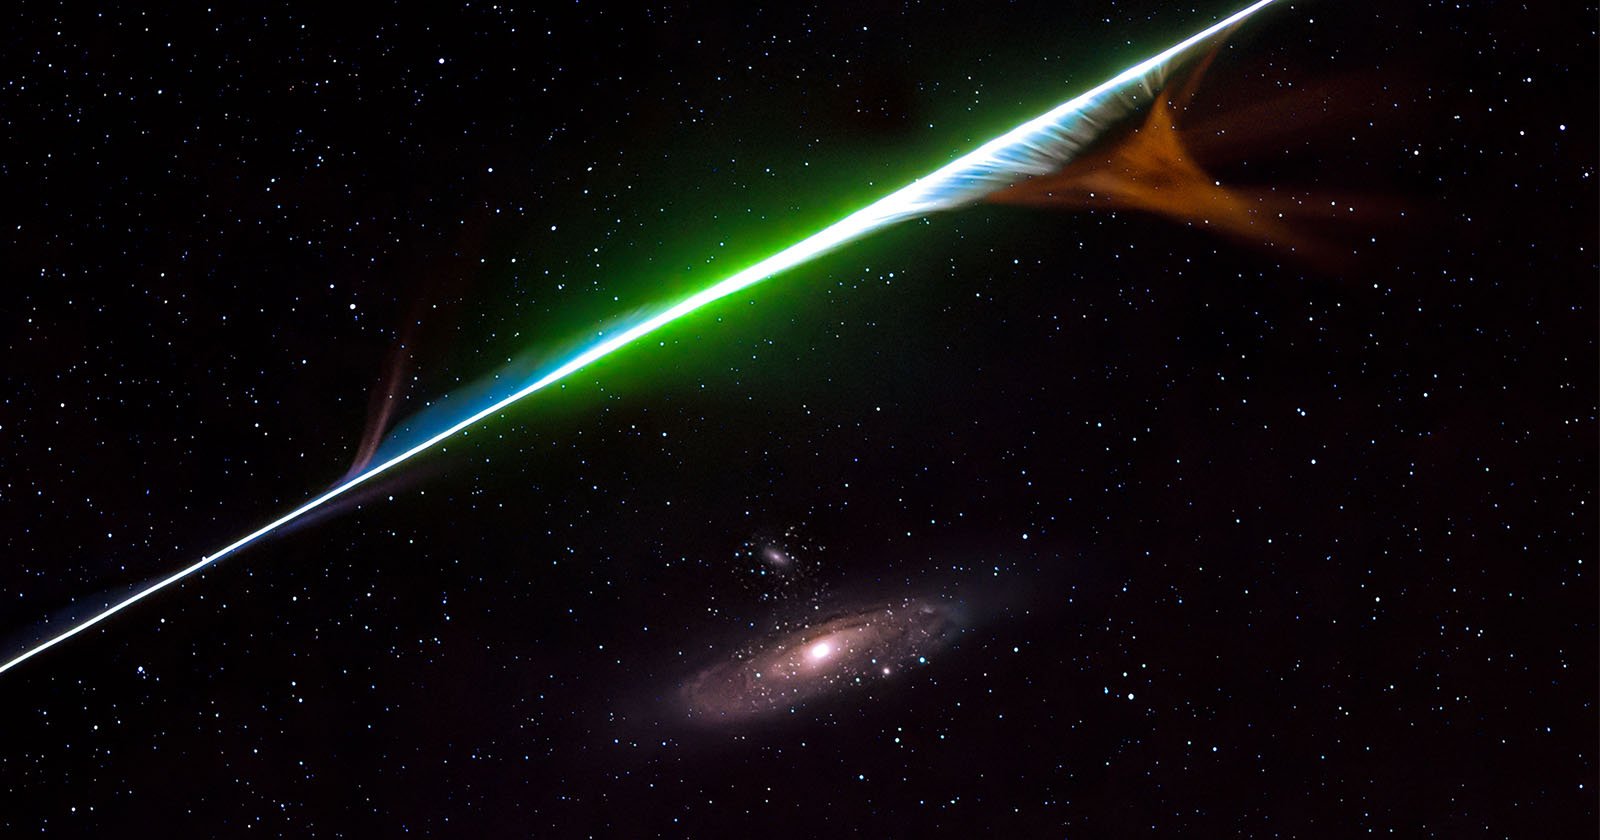 Behind This Once-In-a-Lifetime Photo of a Meteor Streaking by Andromeda